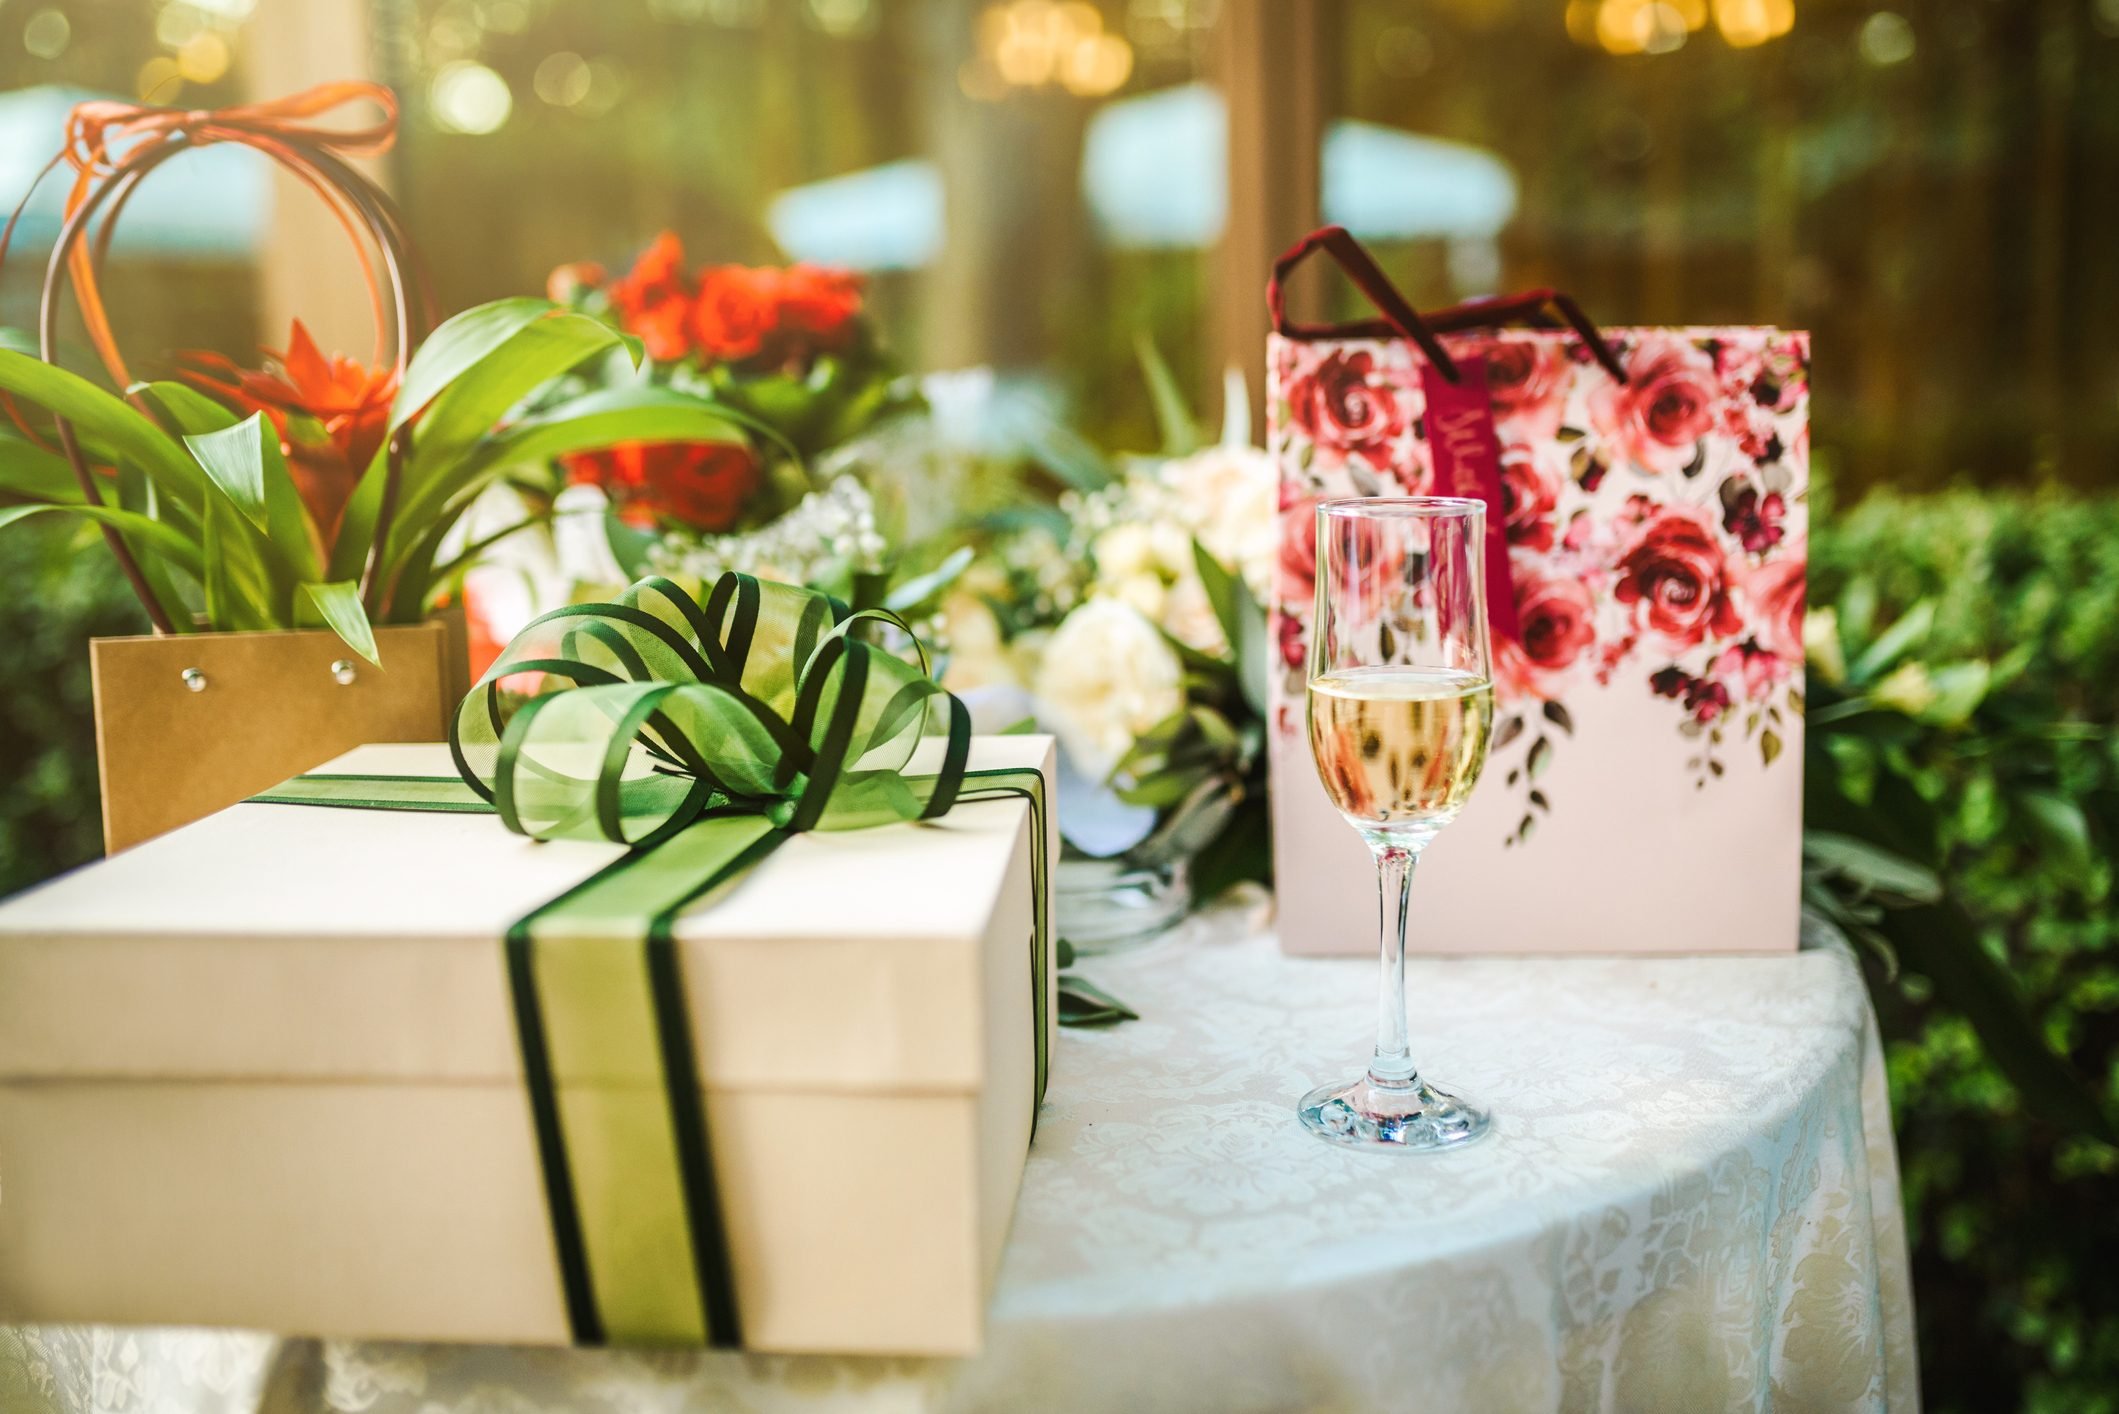 8 Wedding Registry Items I Actually Use Regularly